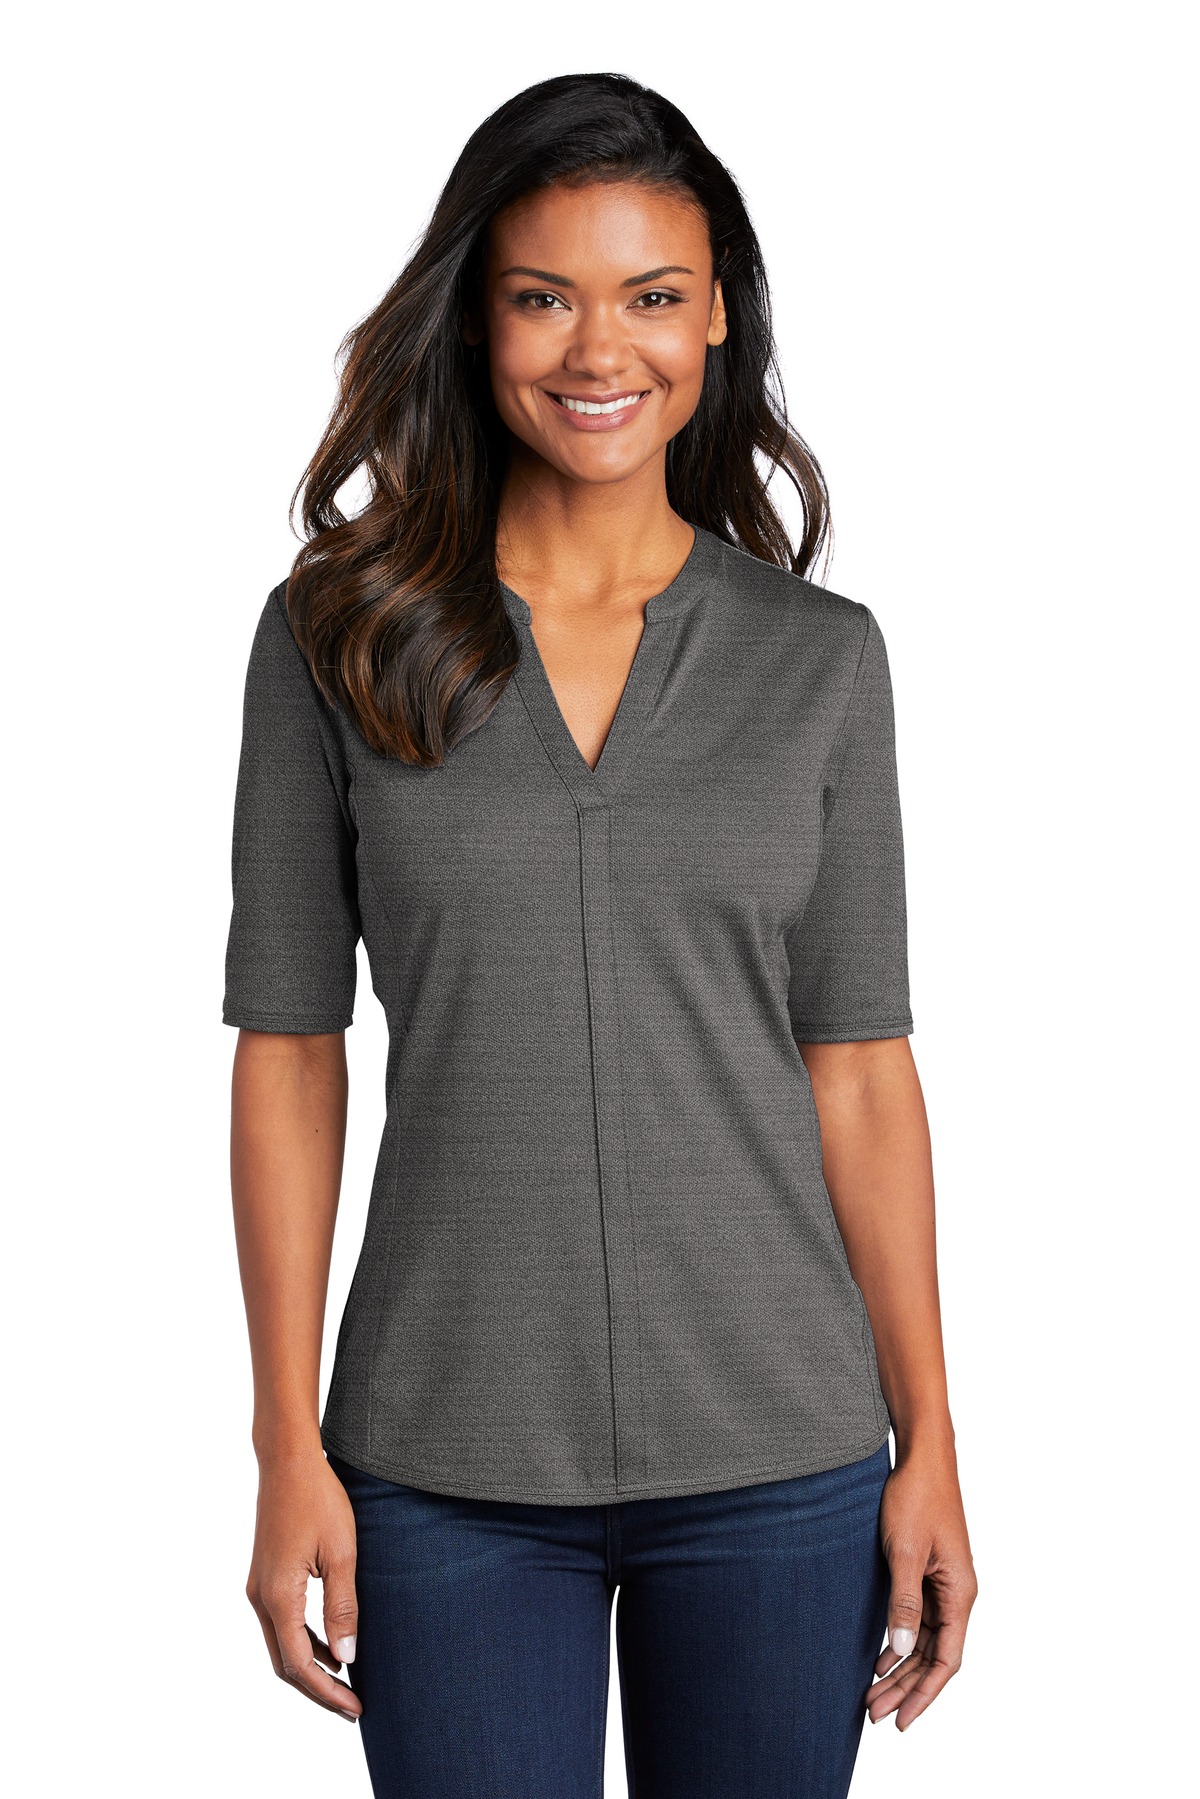 Port Authority Ladies Hospitality Polos & Knits ® Ladies Stretch Heather Open Neck Top-Port Authority